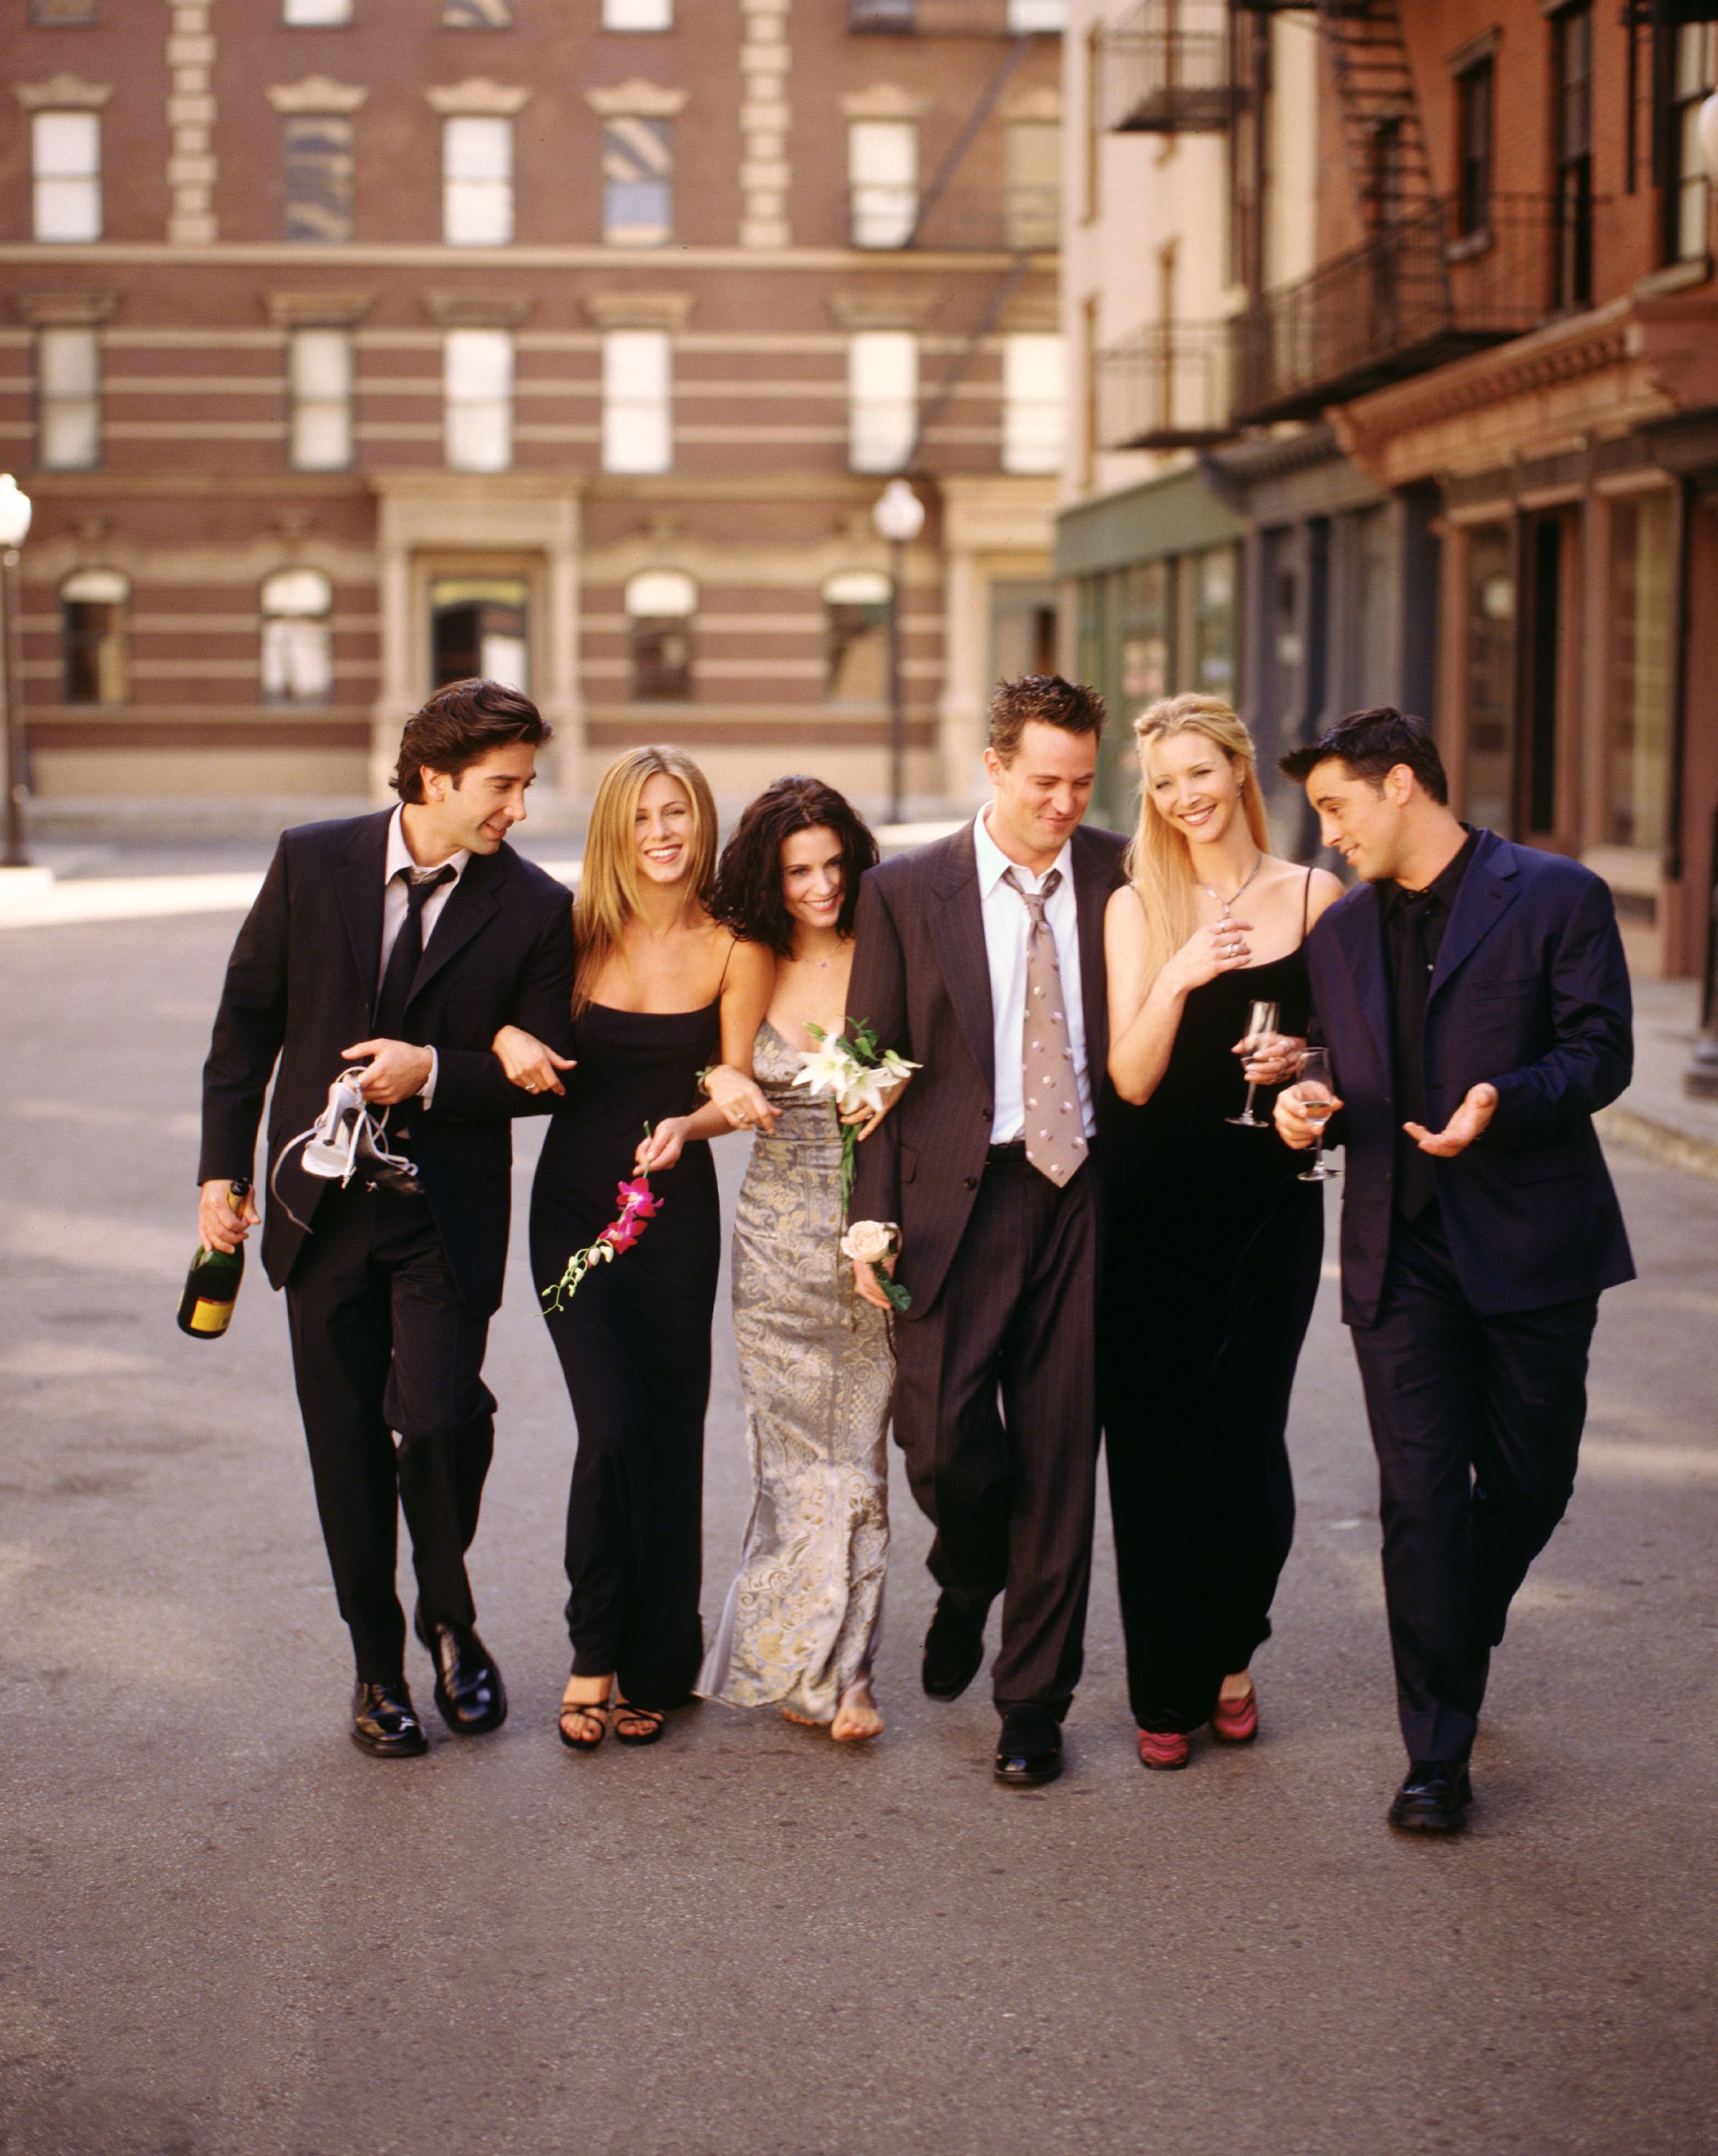 A snapshot of the cast members of NBC's comedy series "Friends" including David Schwimmer, Jennifer Aniston, Courteney Cox, Matthew Perry, Lisa Kudrow, Matt LeBlanc taken in 2001. | Source: Getty Images 